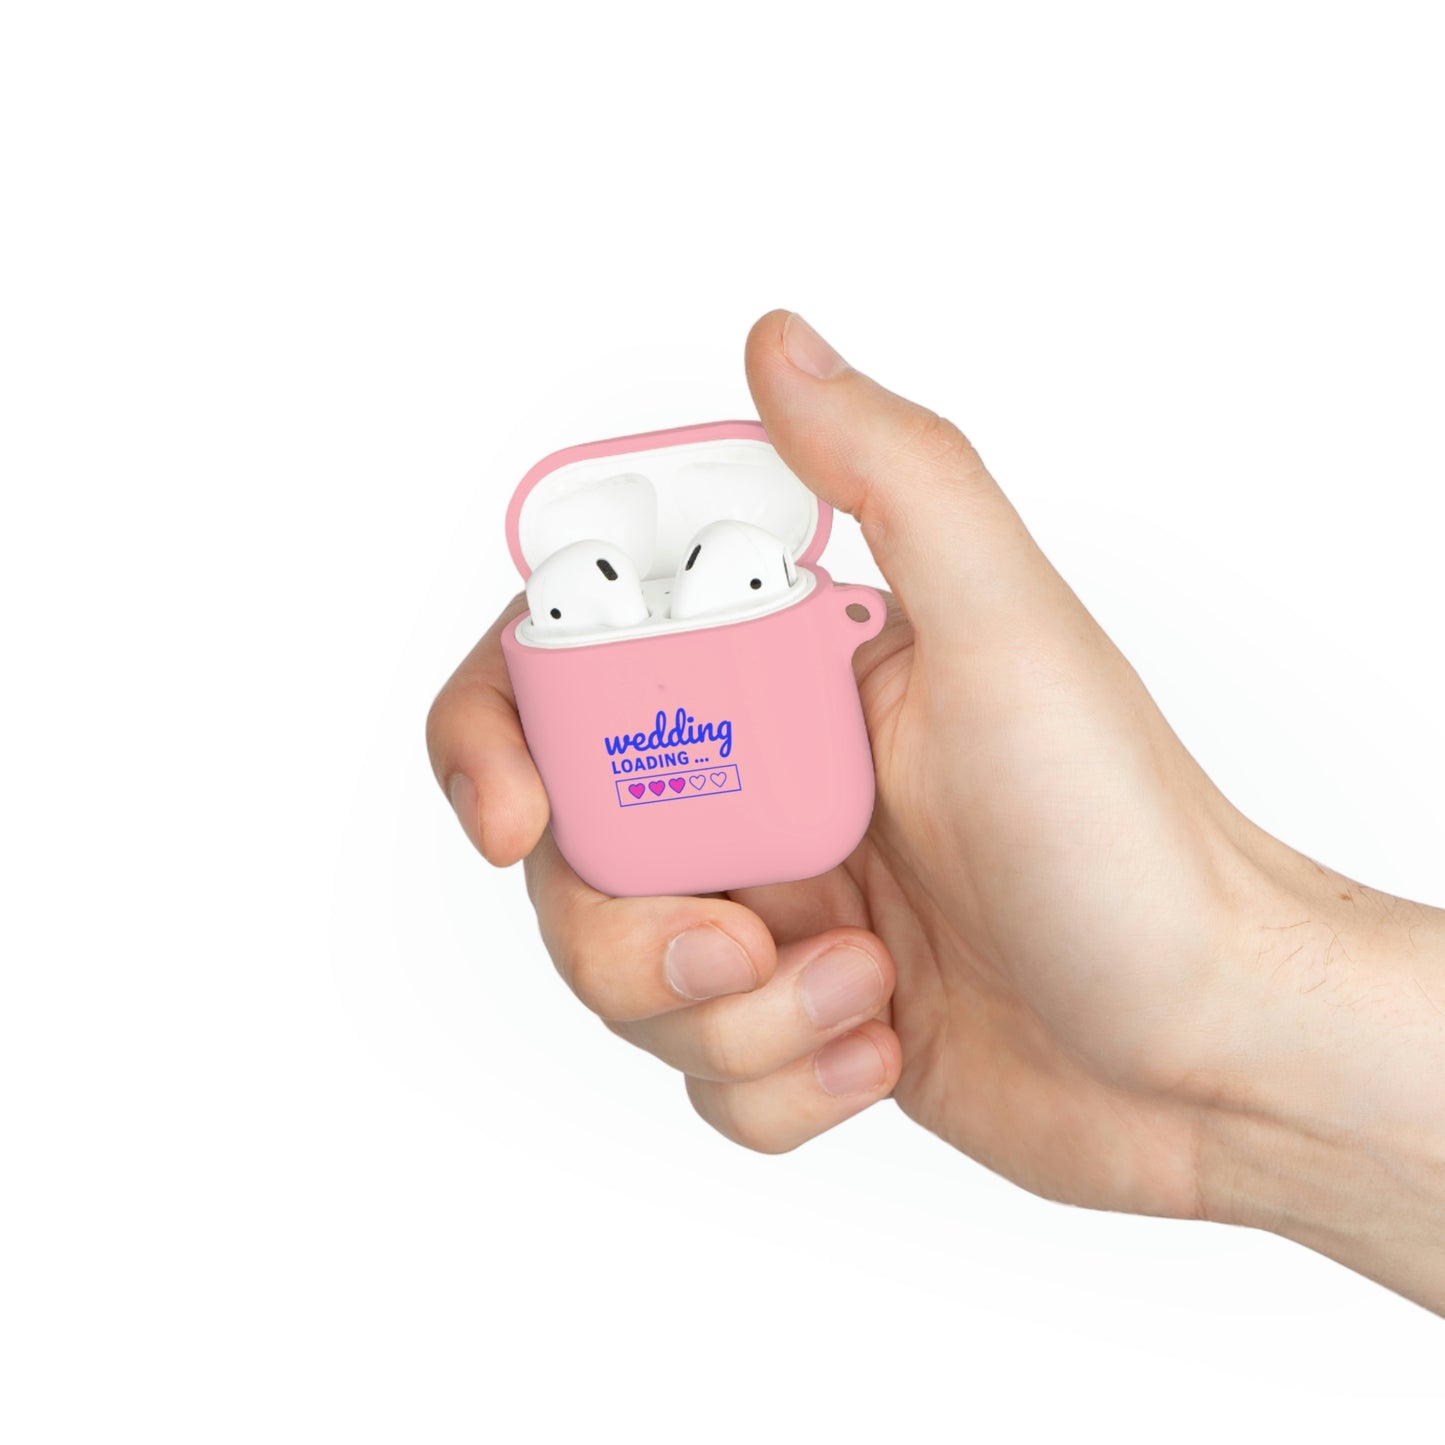 Bridesmaid's gift AirPods and AirPods Pro Case Cover